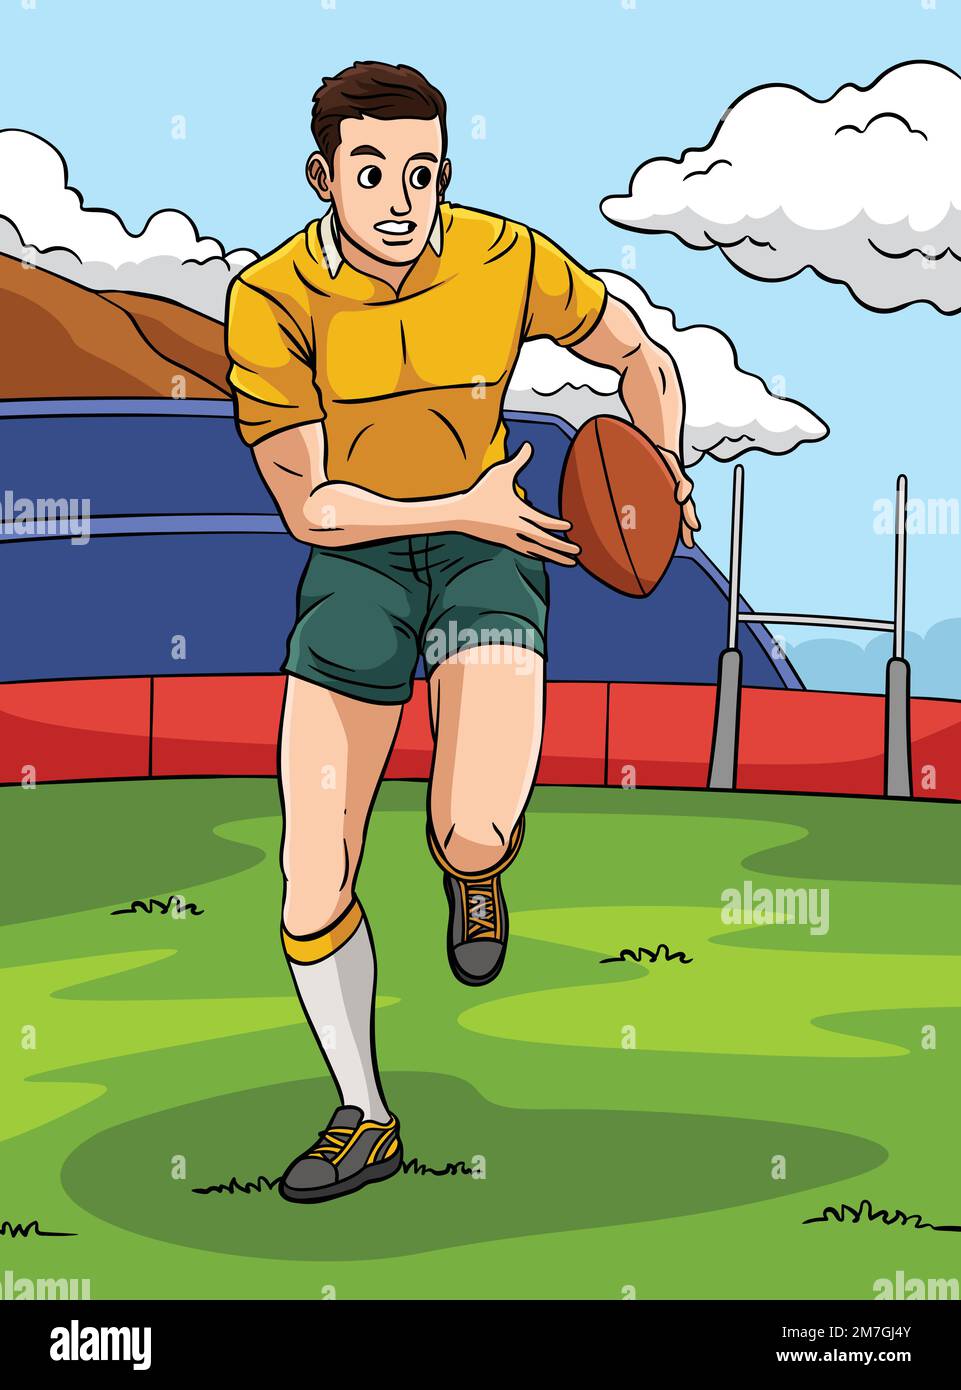 Rugby Sports Colored Cartoon Illustration Stock Vector